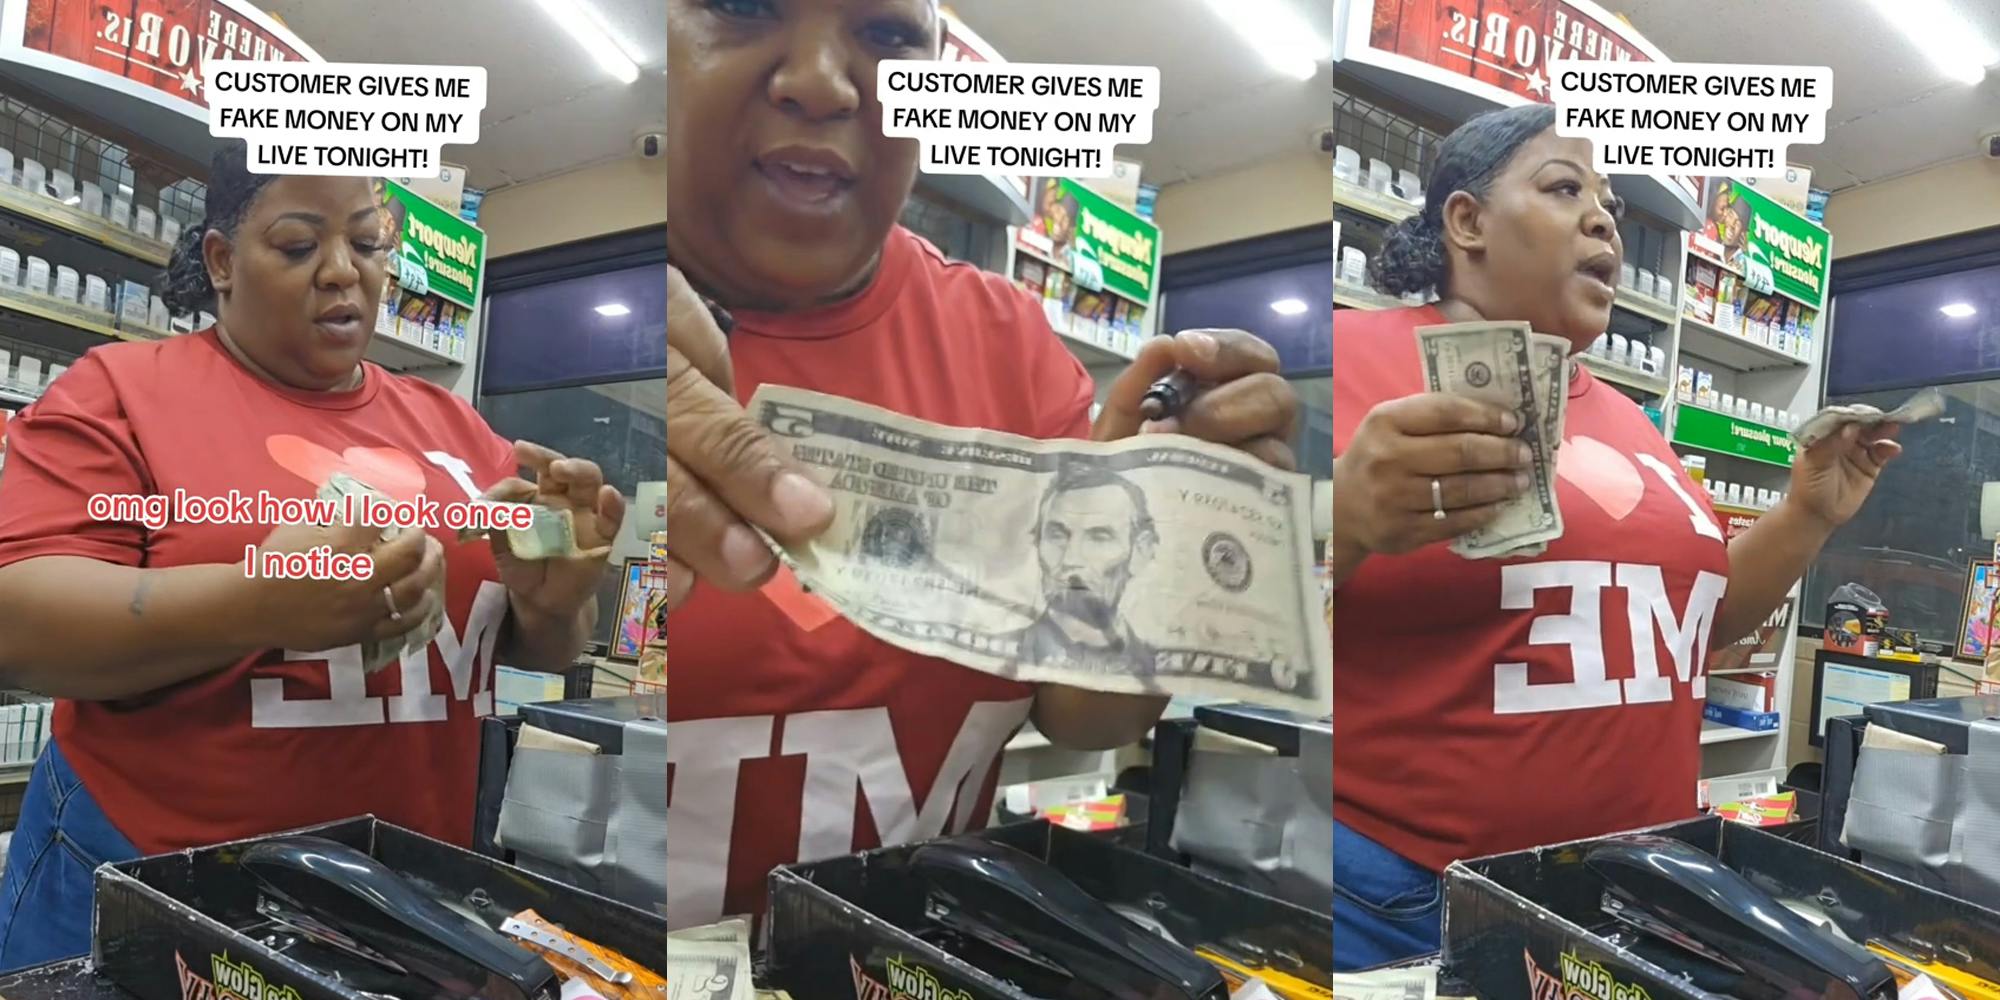 gas station worker holding money while speaking at cash register with caption "CUSTOMER GIVES ME FAKE MONEY ON MY LIVE TONIGHT!" "omg look how I look once I notice" (l) gas station worker holding money while speaking at cash register with caption "CUSTOMER GIVES ME FAKE MONEY ON MY LIVE TONIGHT!" (c) gas station worker holding money while speaking at cash register with caption "CUSTOMER GIVES ME FAKE MONEY ON MY LIVE TONIGHT!" " (r)